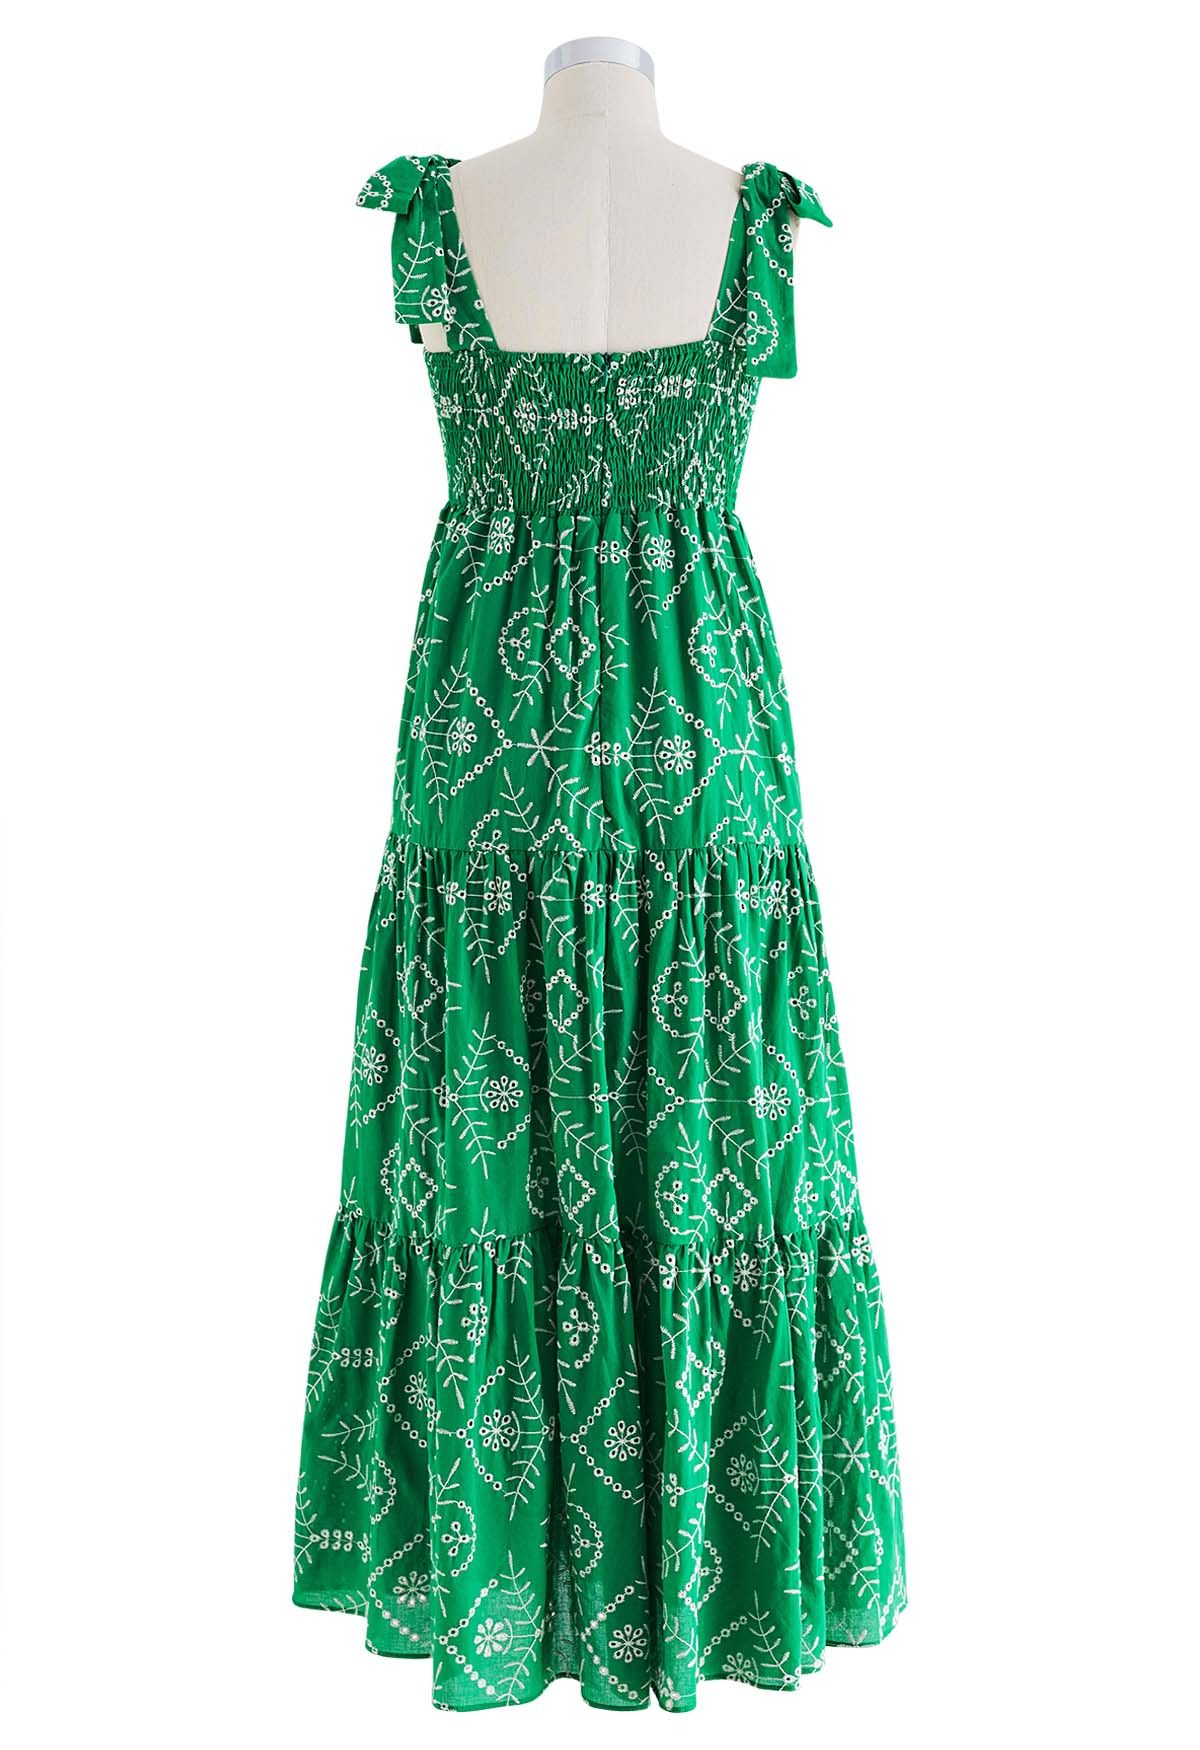 Green Eyelet Embroidered Tie-Strap Maxi Dress